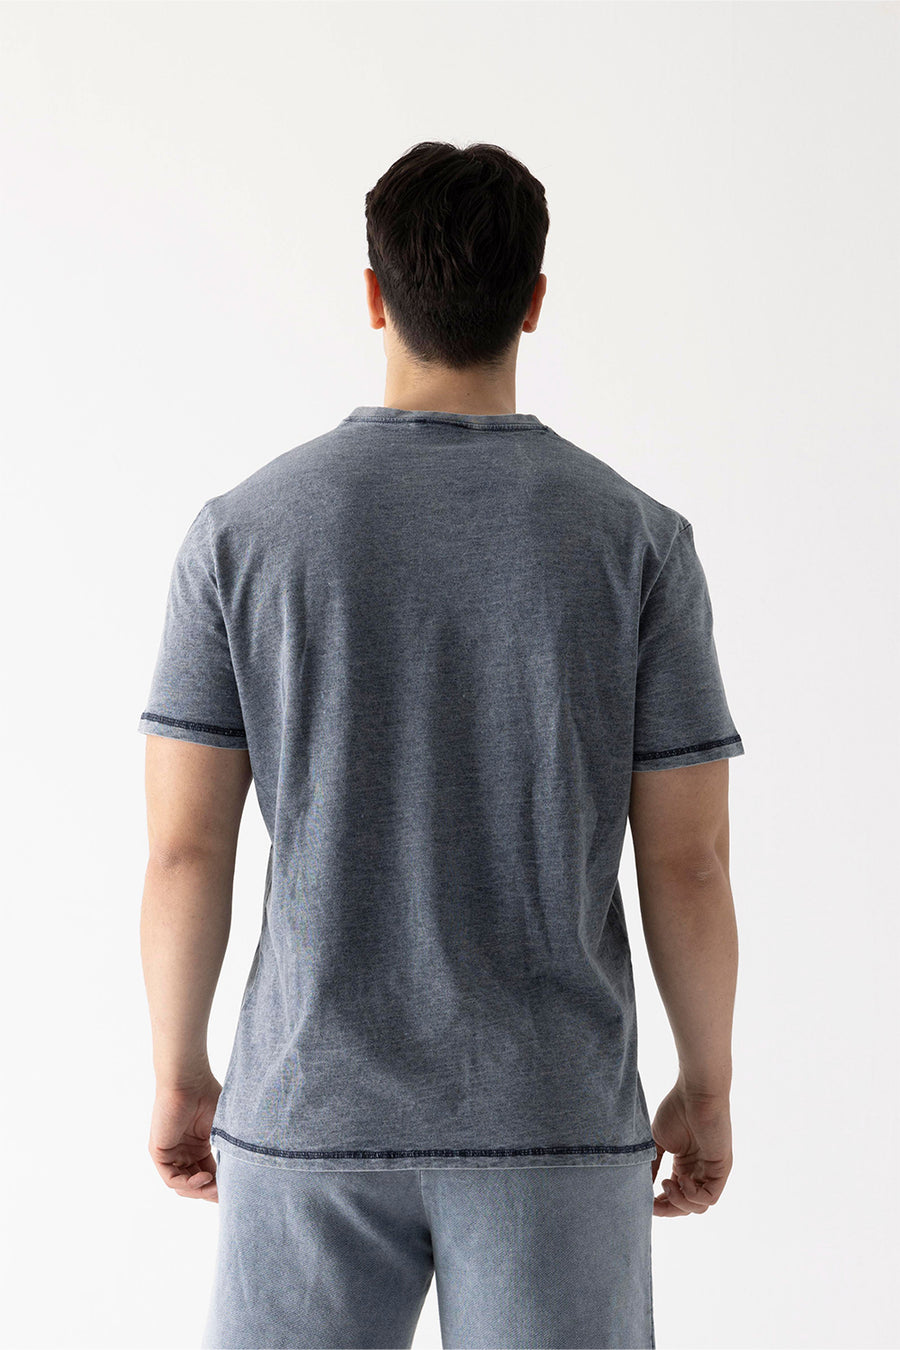 GNP Denim Look Washed V Neck Relaxed T-Shirt